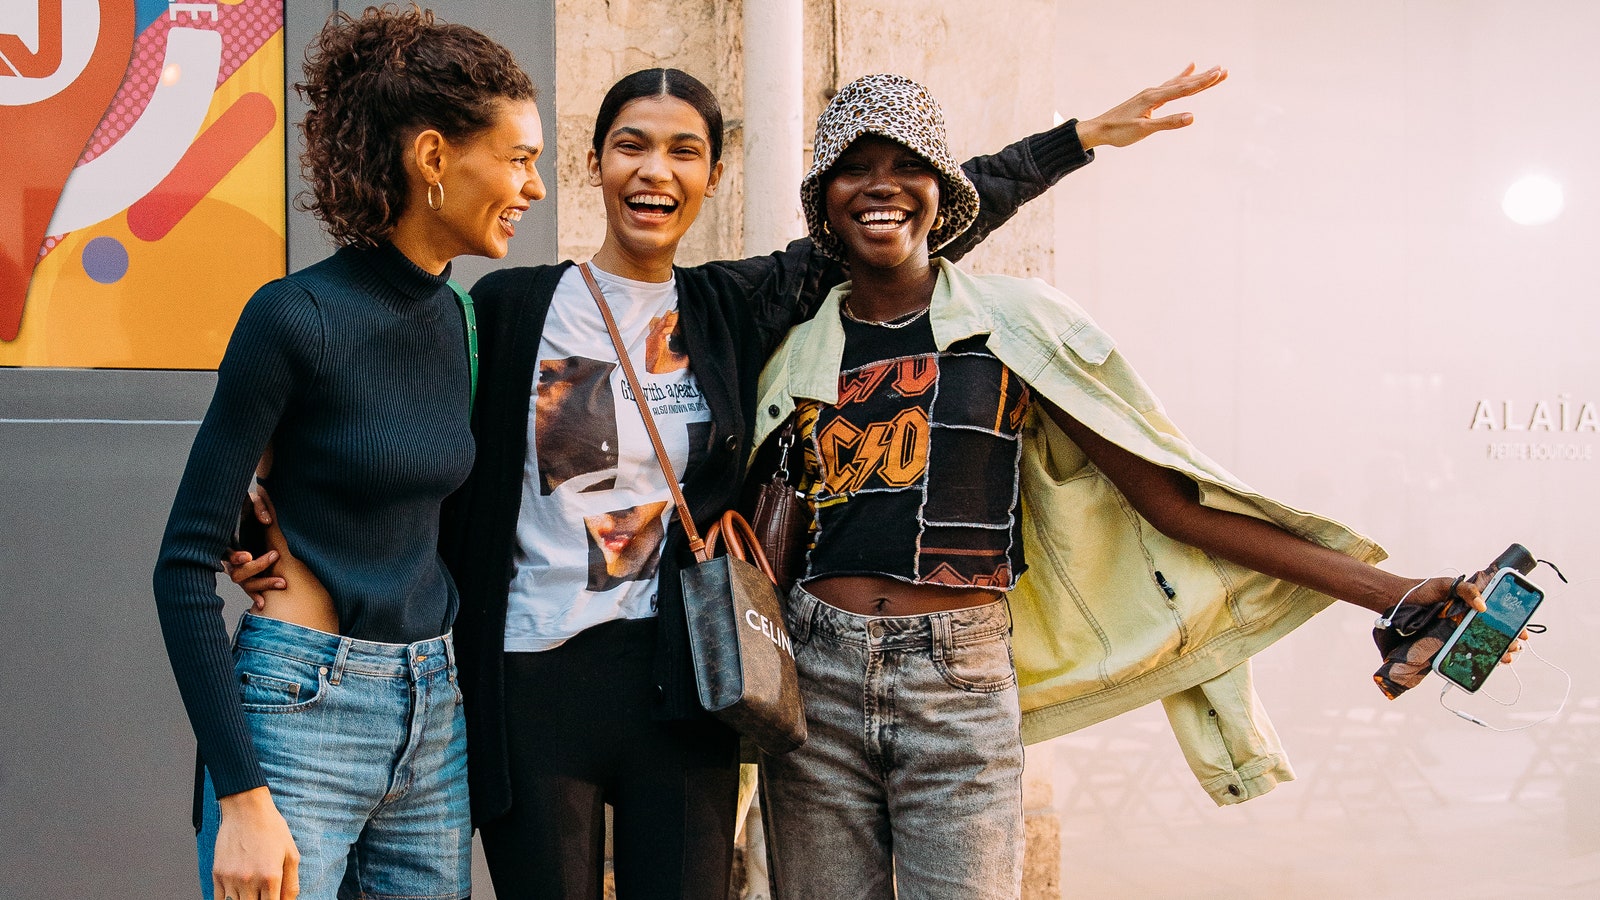 The Best Street Style at the Fall 2021 Couture Shows in Paris